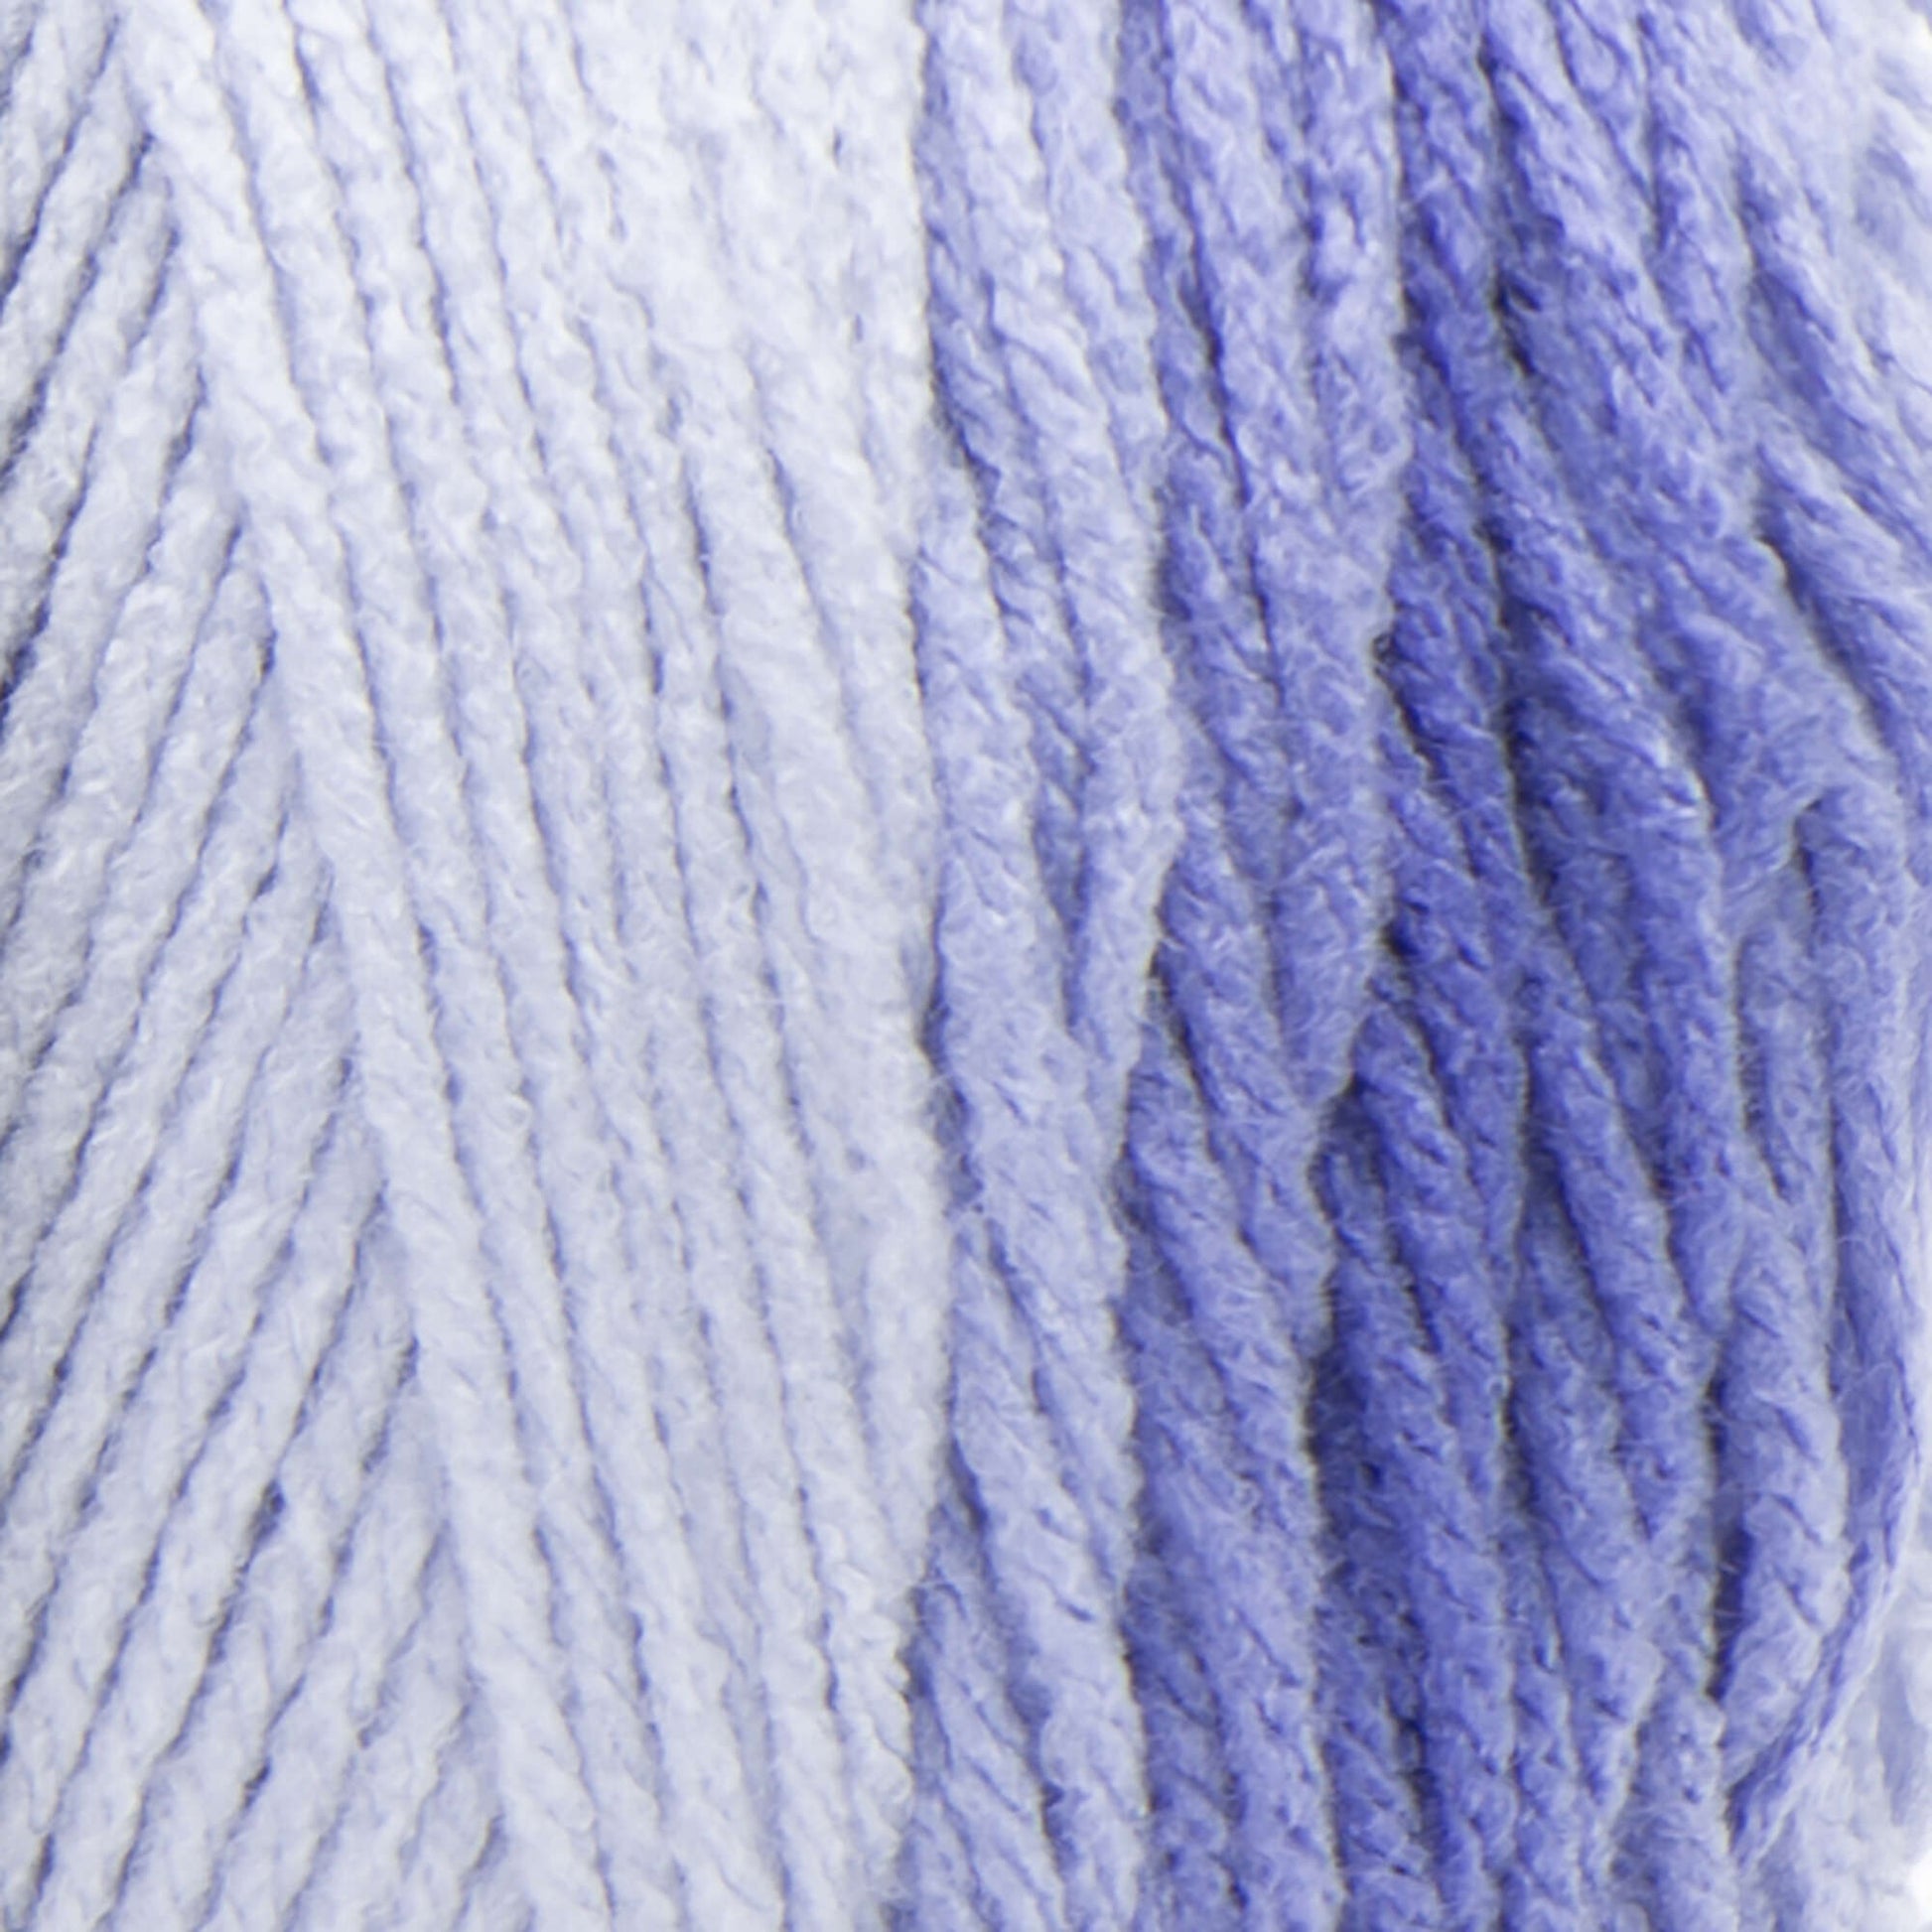 Red Heart Super Saver Ombre Yarn Baja Blue